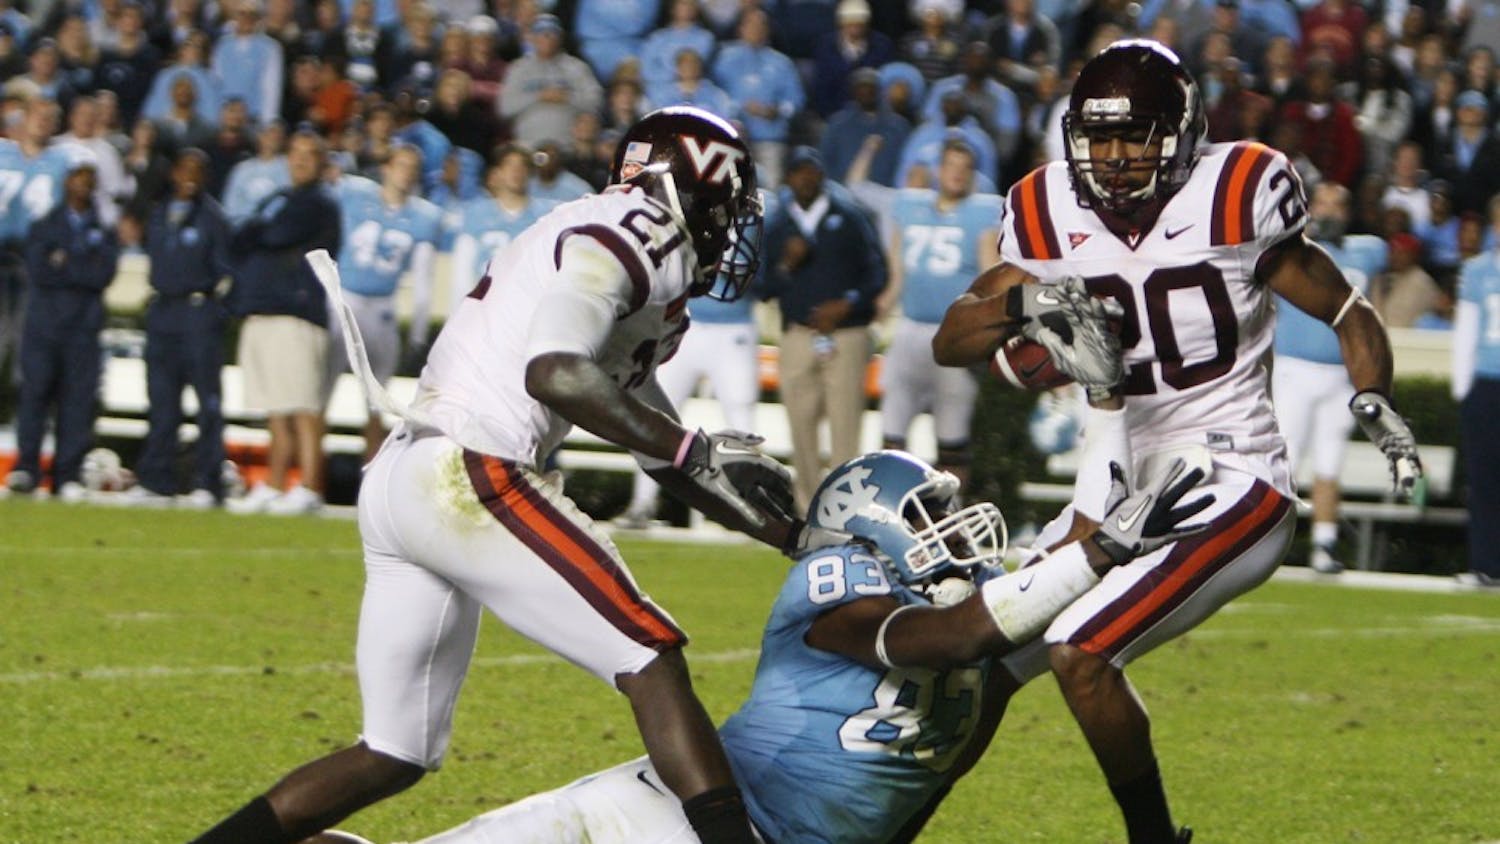 Jayron Hosley (20) comes up with one of four Virginia Tech interceptions on Saturday. Dwight Jones (83) tallied only one catch after being the team’s top wide receiver as of late.